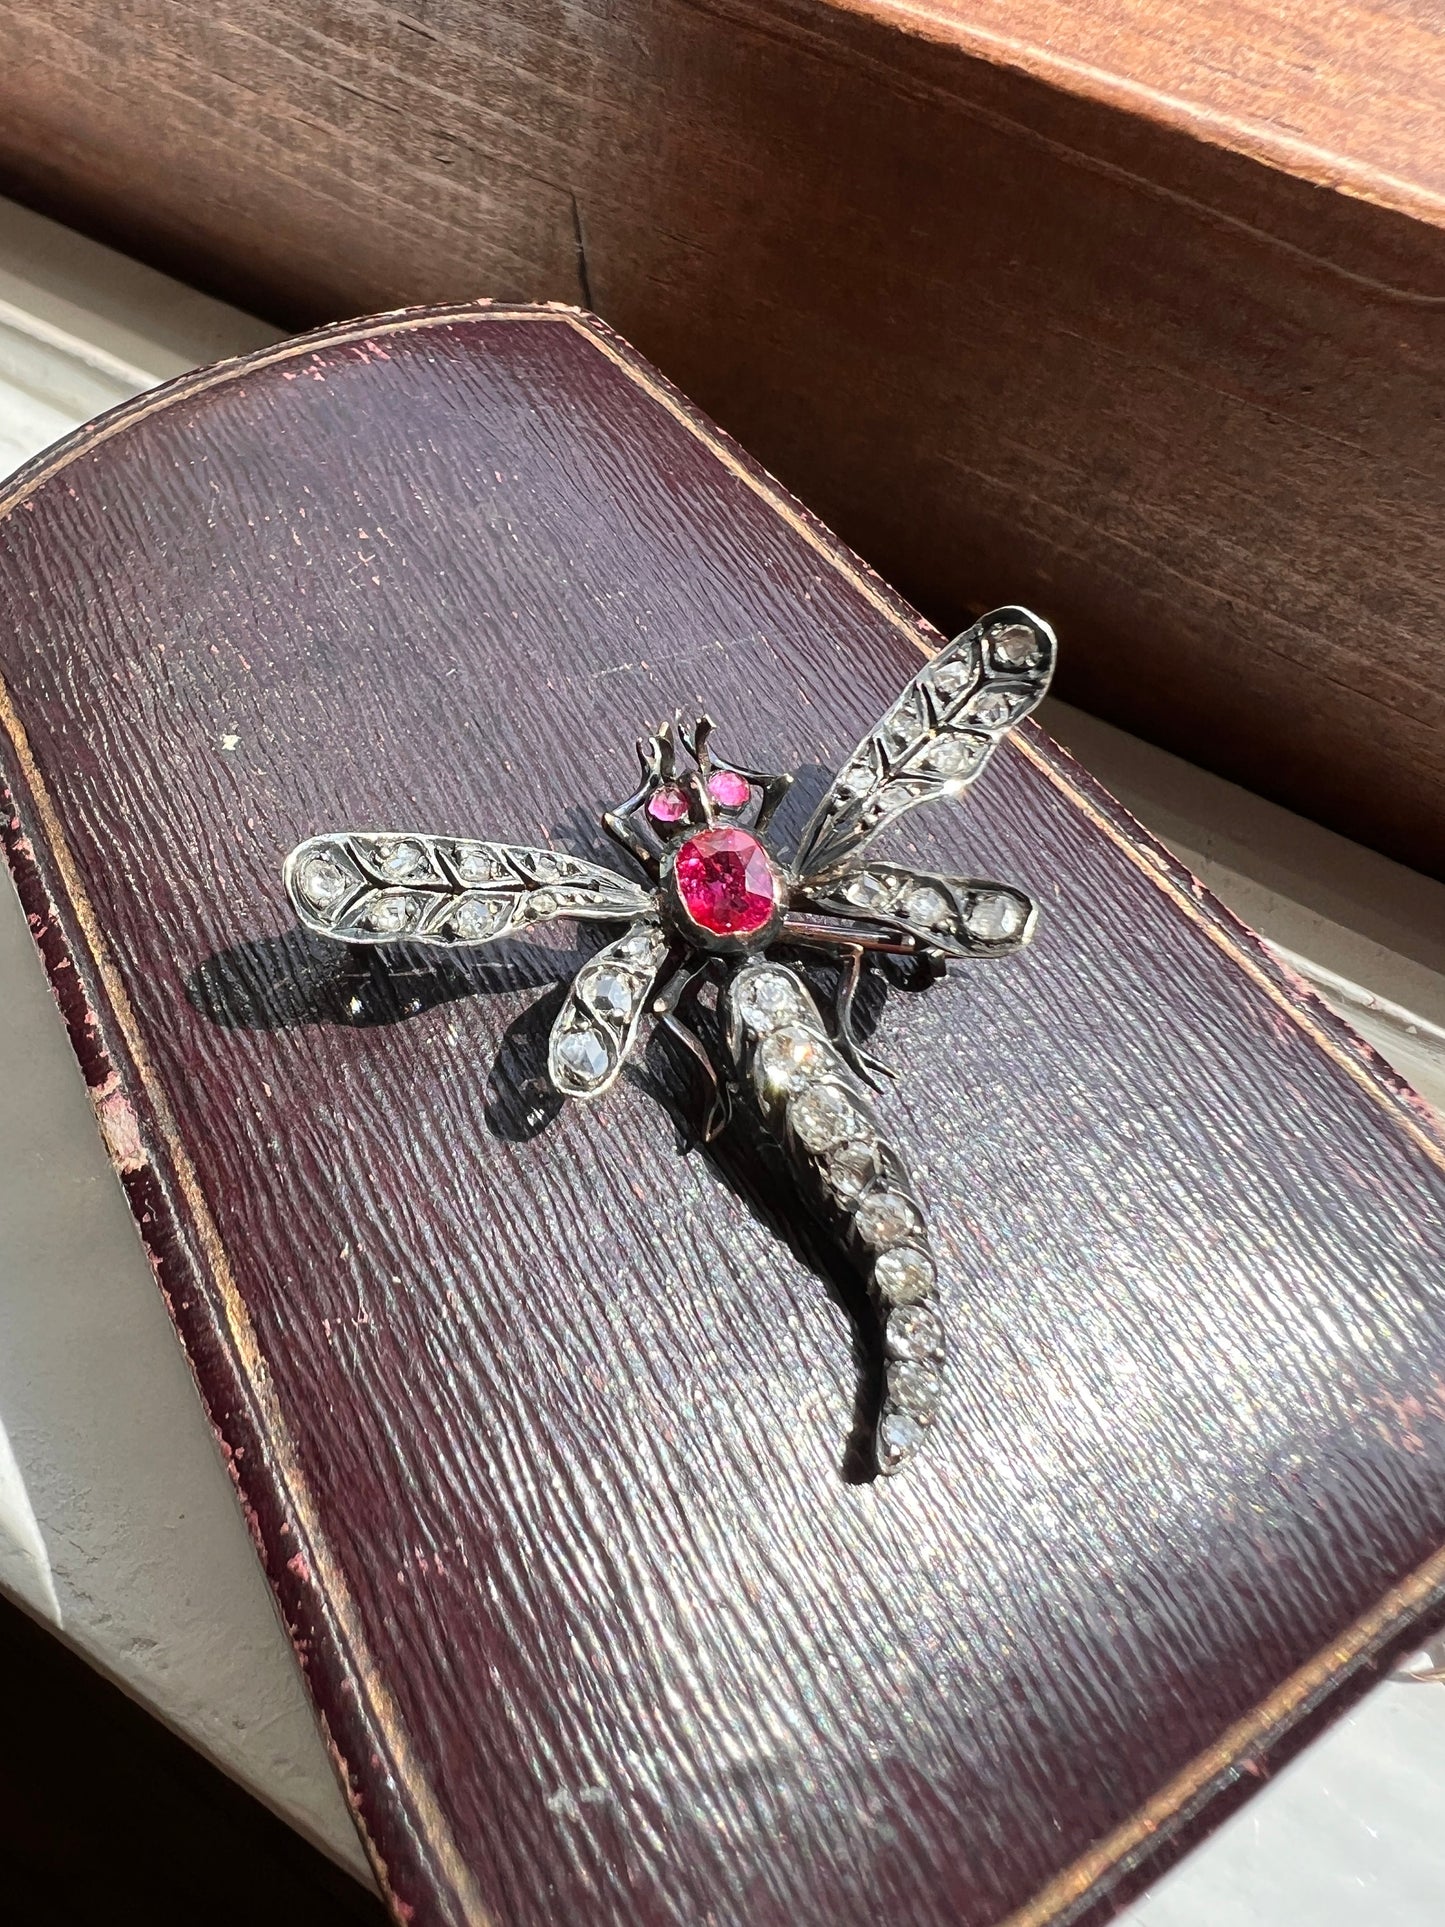 DRAGONFLY Big French Antique Victorian Figural Pin Pendant 1 Carat Rose Old Mine Cut DIAMOND Ruby 18k Gold Silver Figural Belle Epoque 1 Ctw